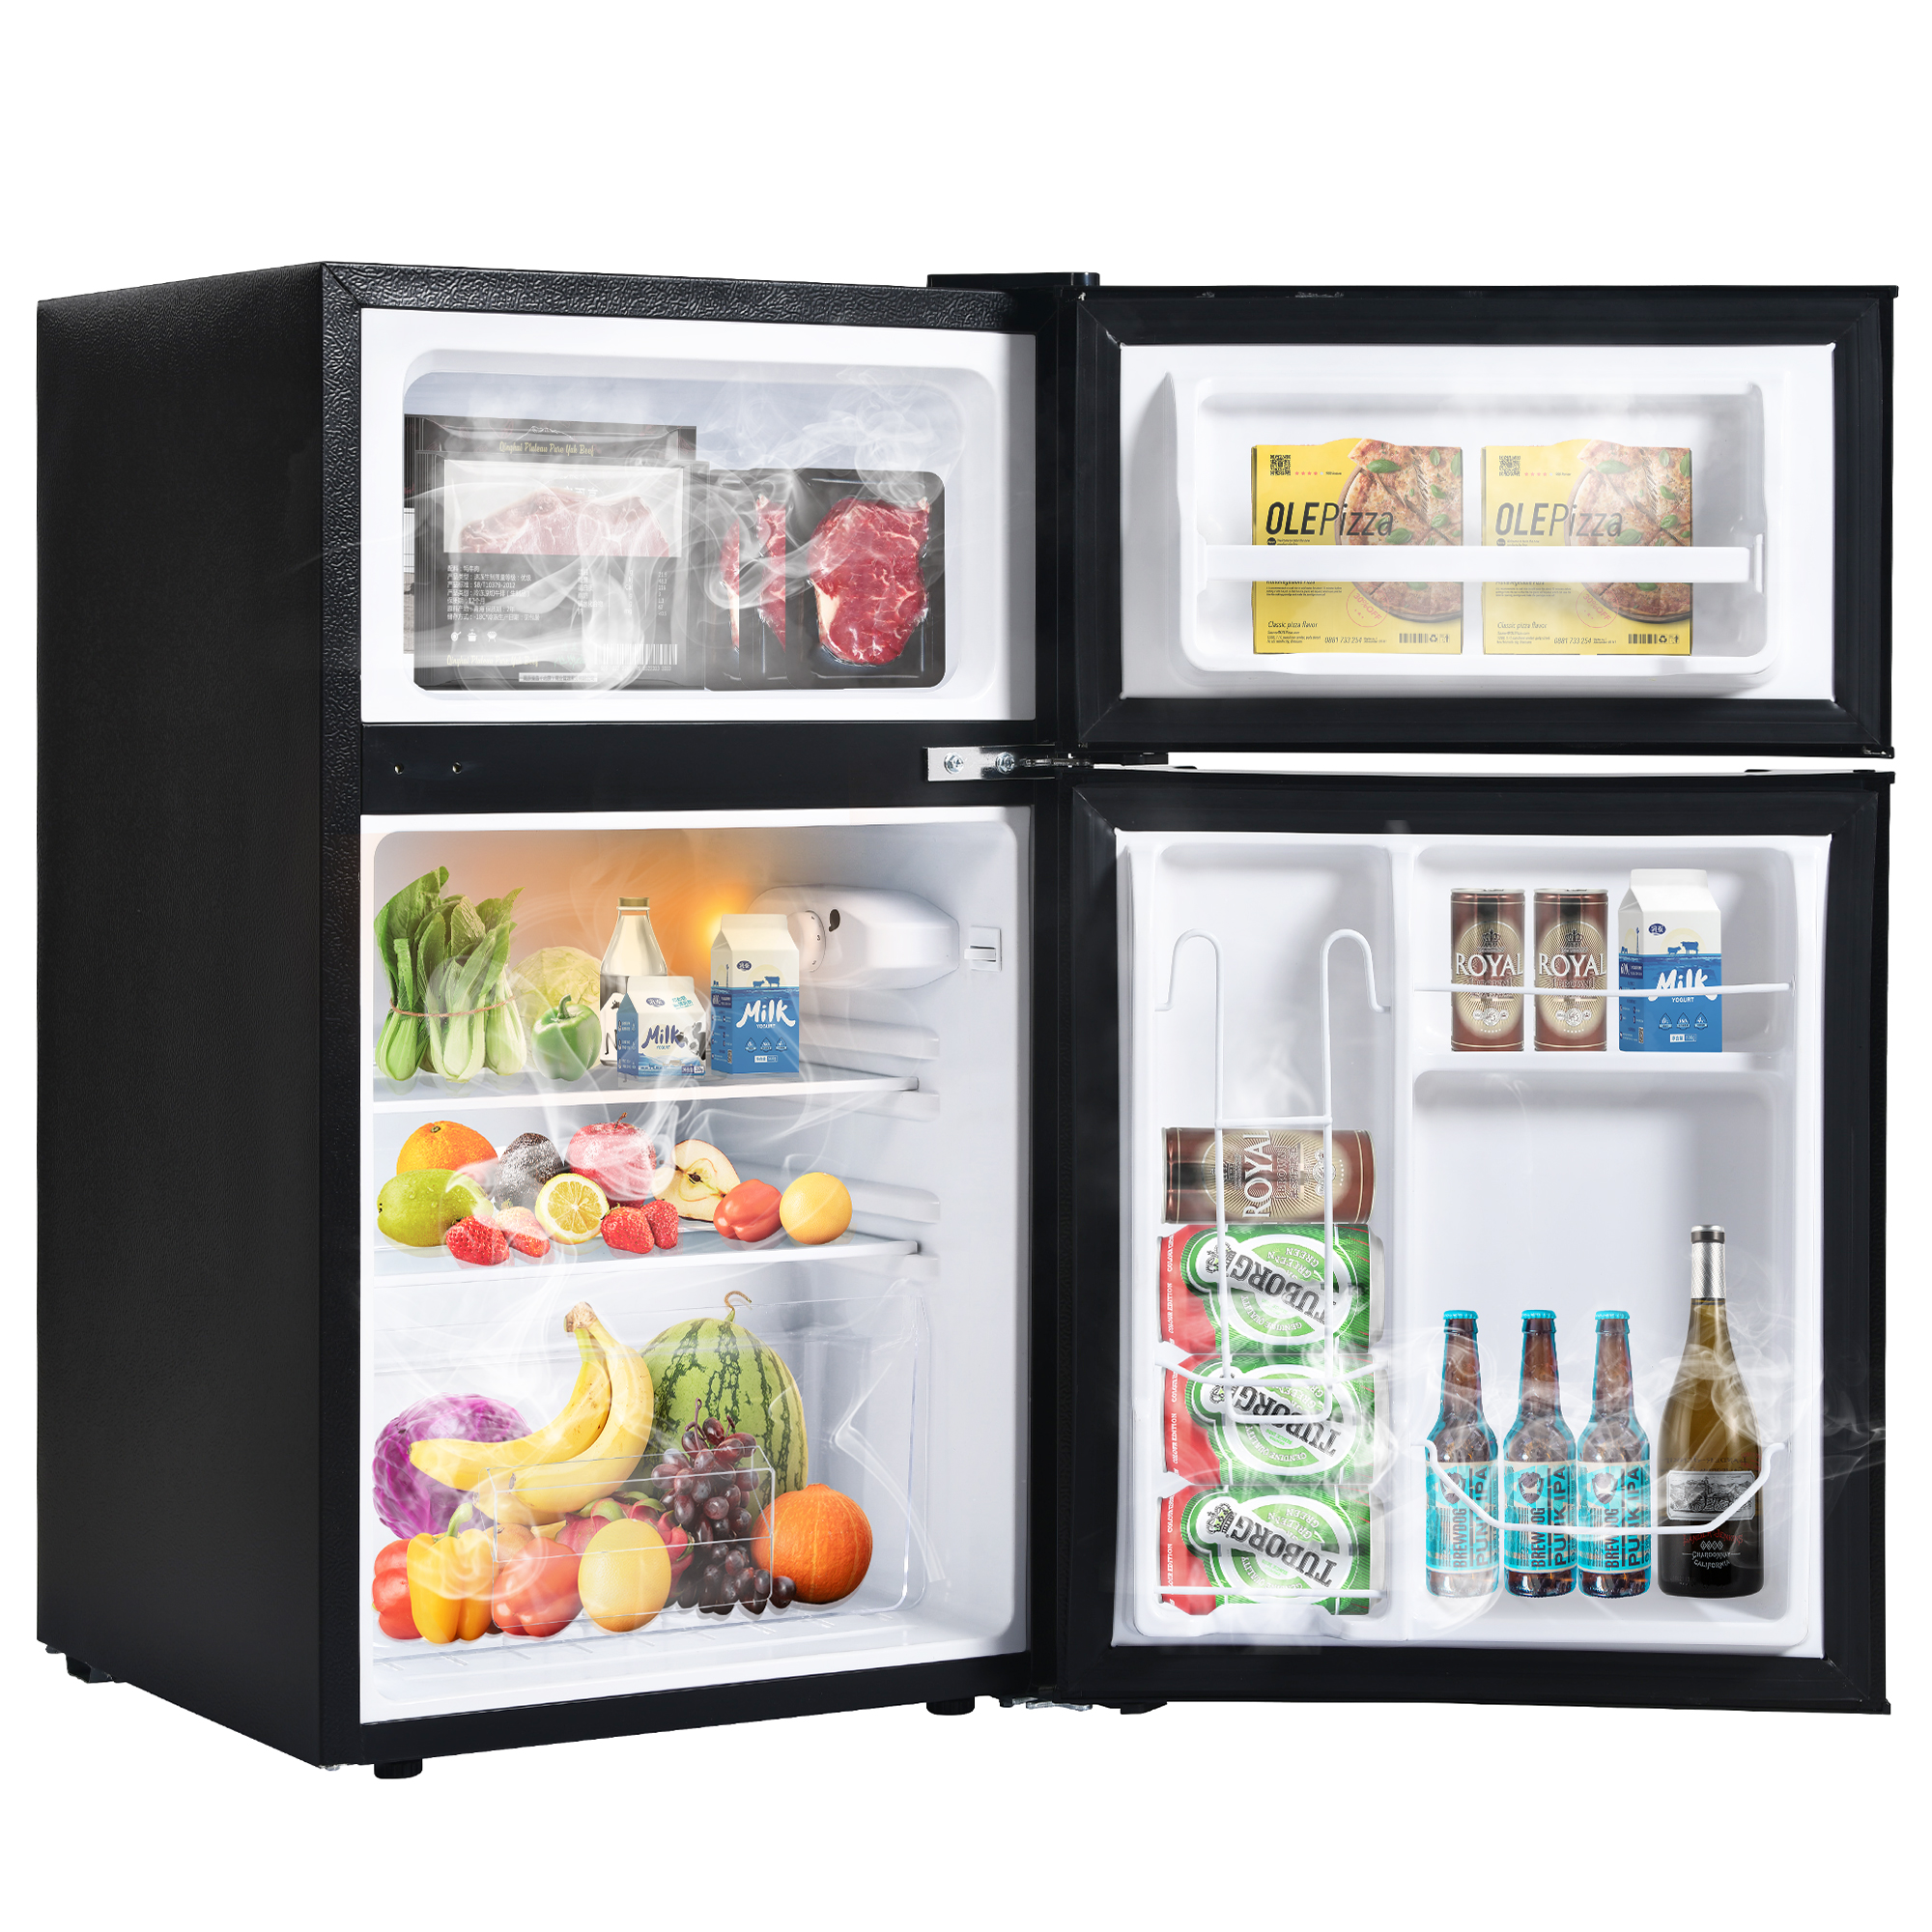 3.2 Cu.Ft. Mini Fridge with Freezer, Single Door Compact Refrigerator/Freezer with 7-Level Adjustable Thermostat,Small Refrigerator for Apartment